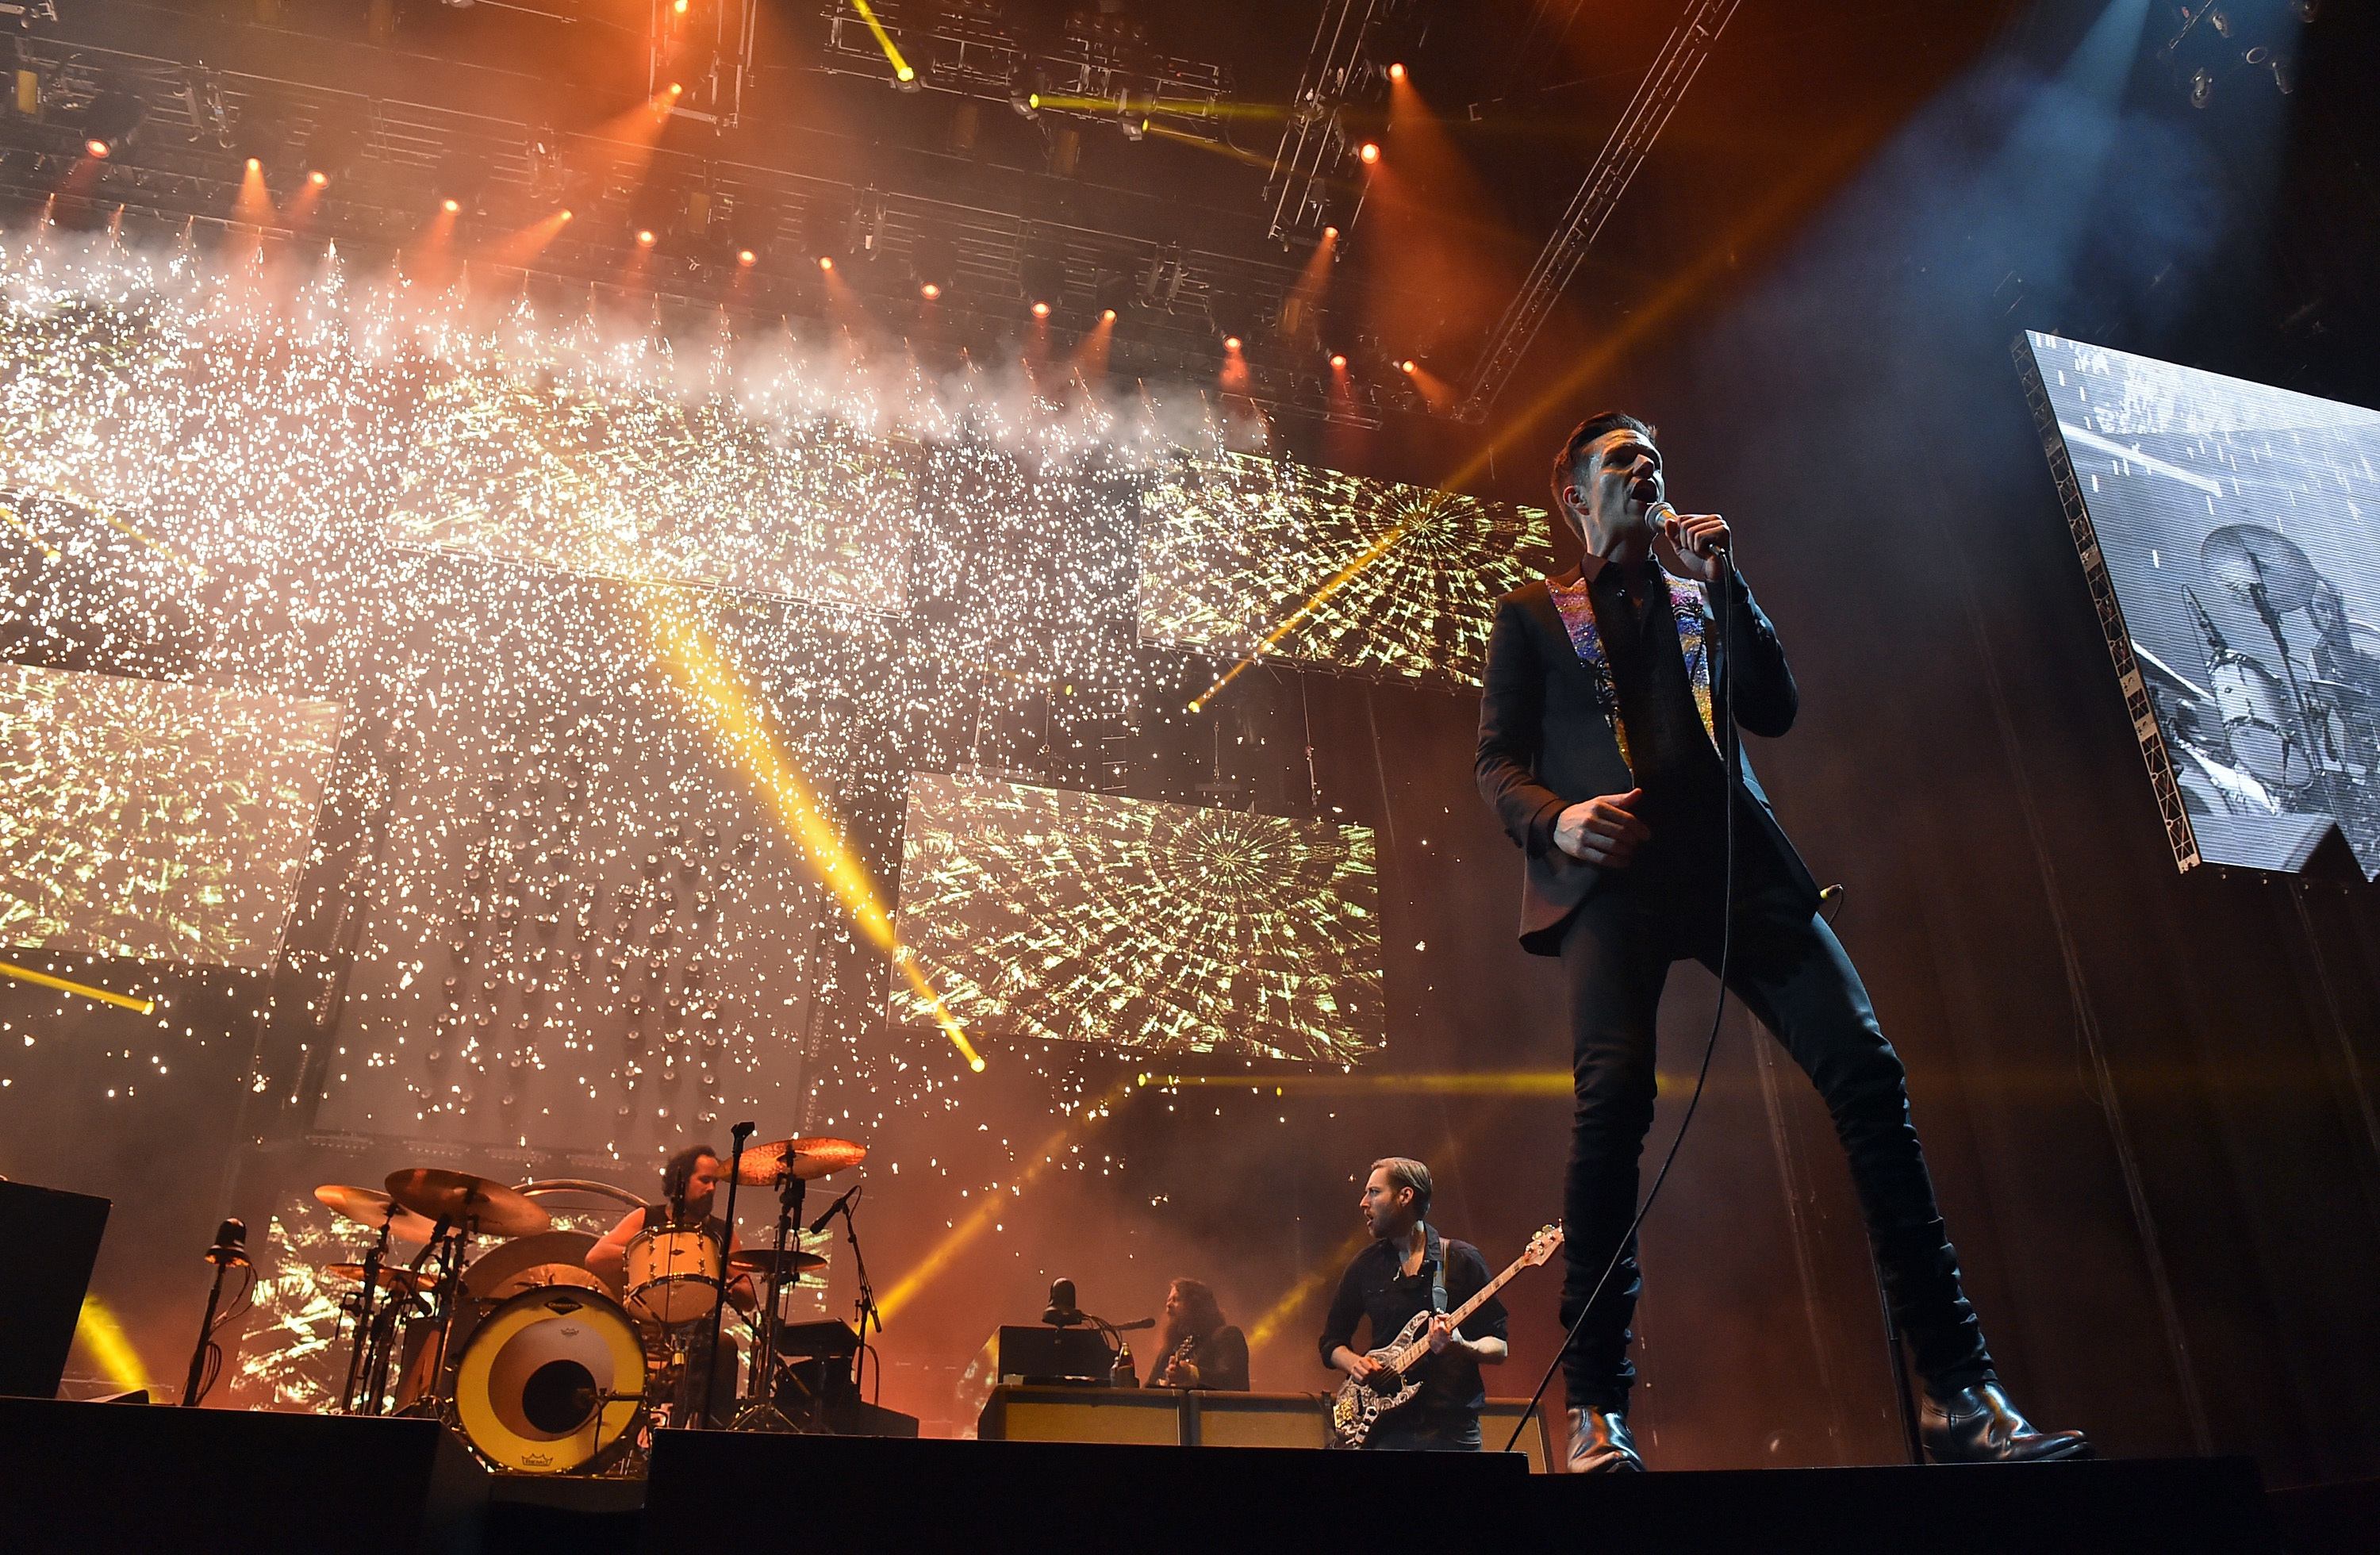 Disappointed fans see tickets for The Killers' UK tour sell out within